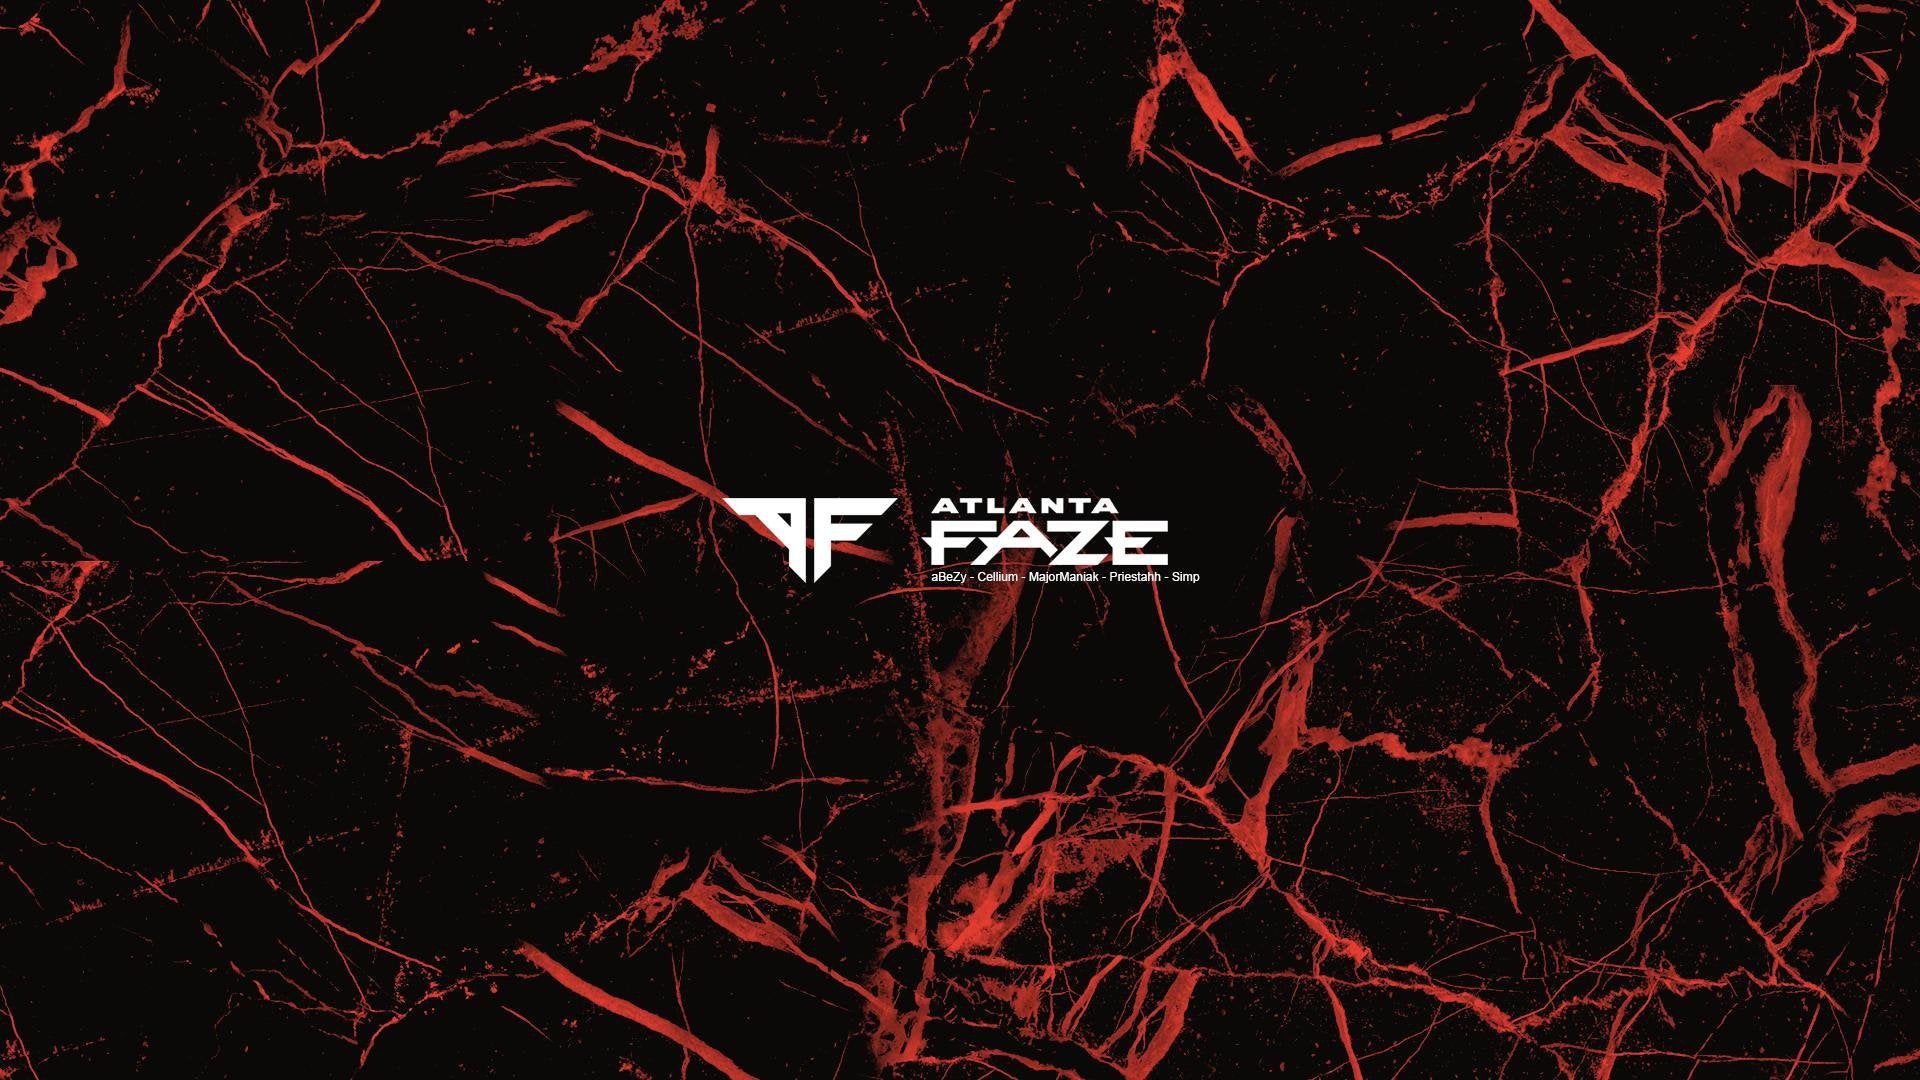 Atlanta FaZe matching desktop and phone wallpaper. Let me know which team you'd like to see next